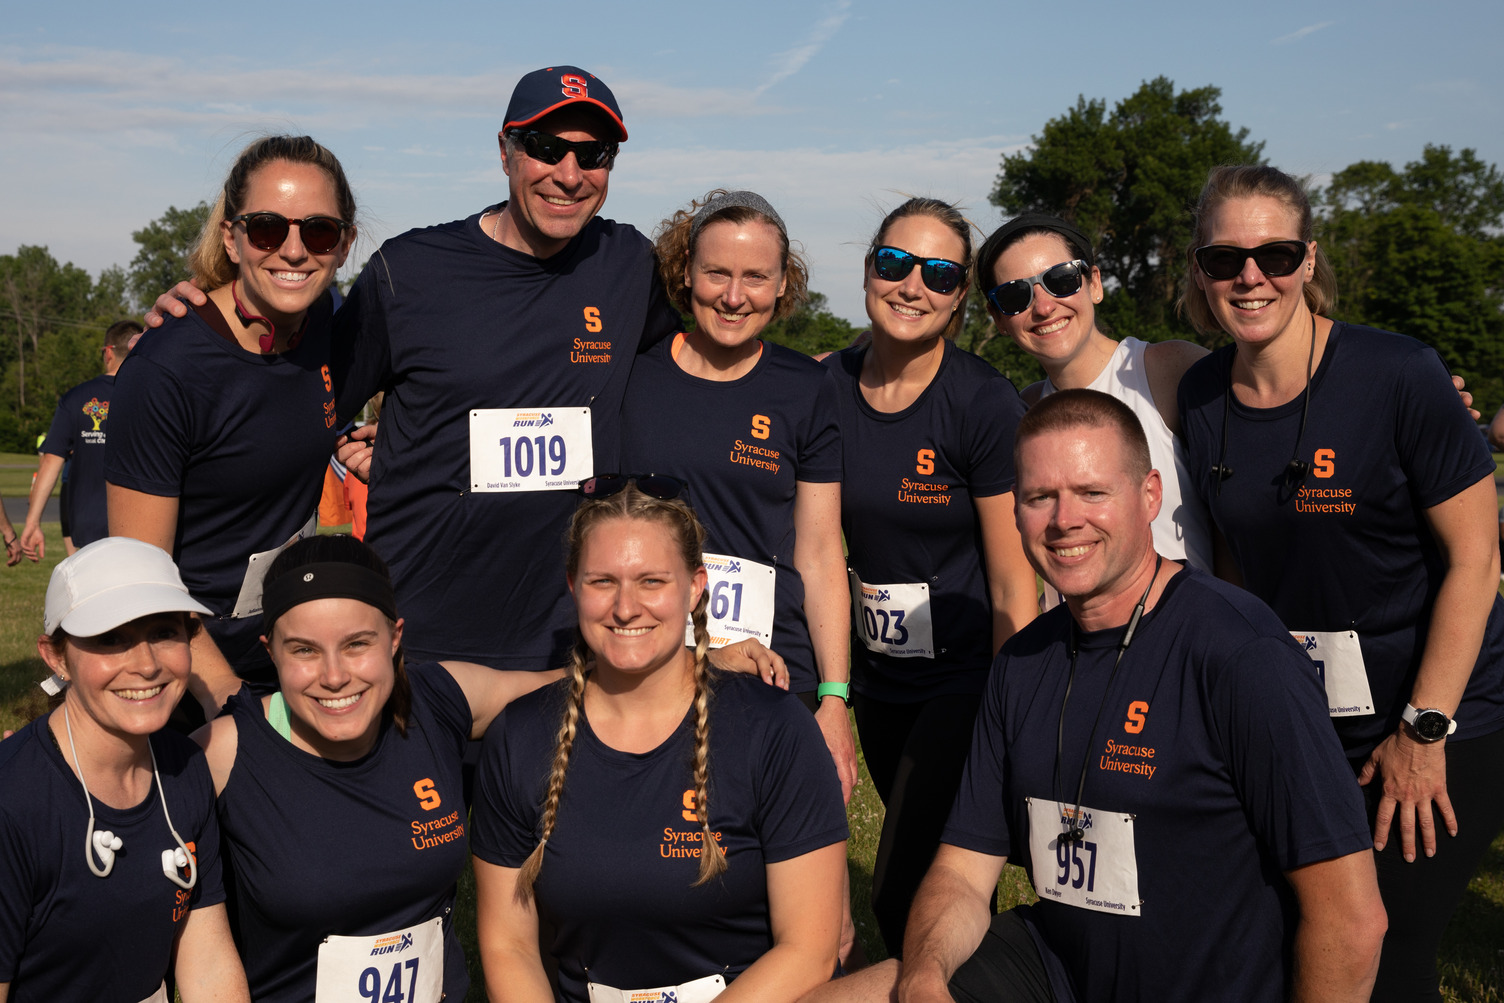 a group of faculty and staff pose together at the Syracuse Workforce Run